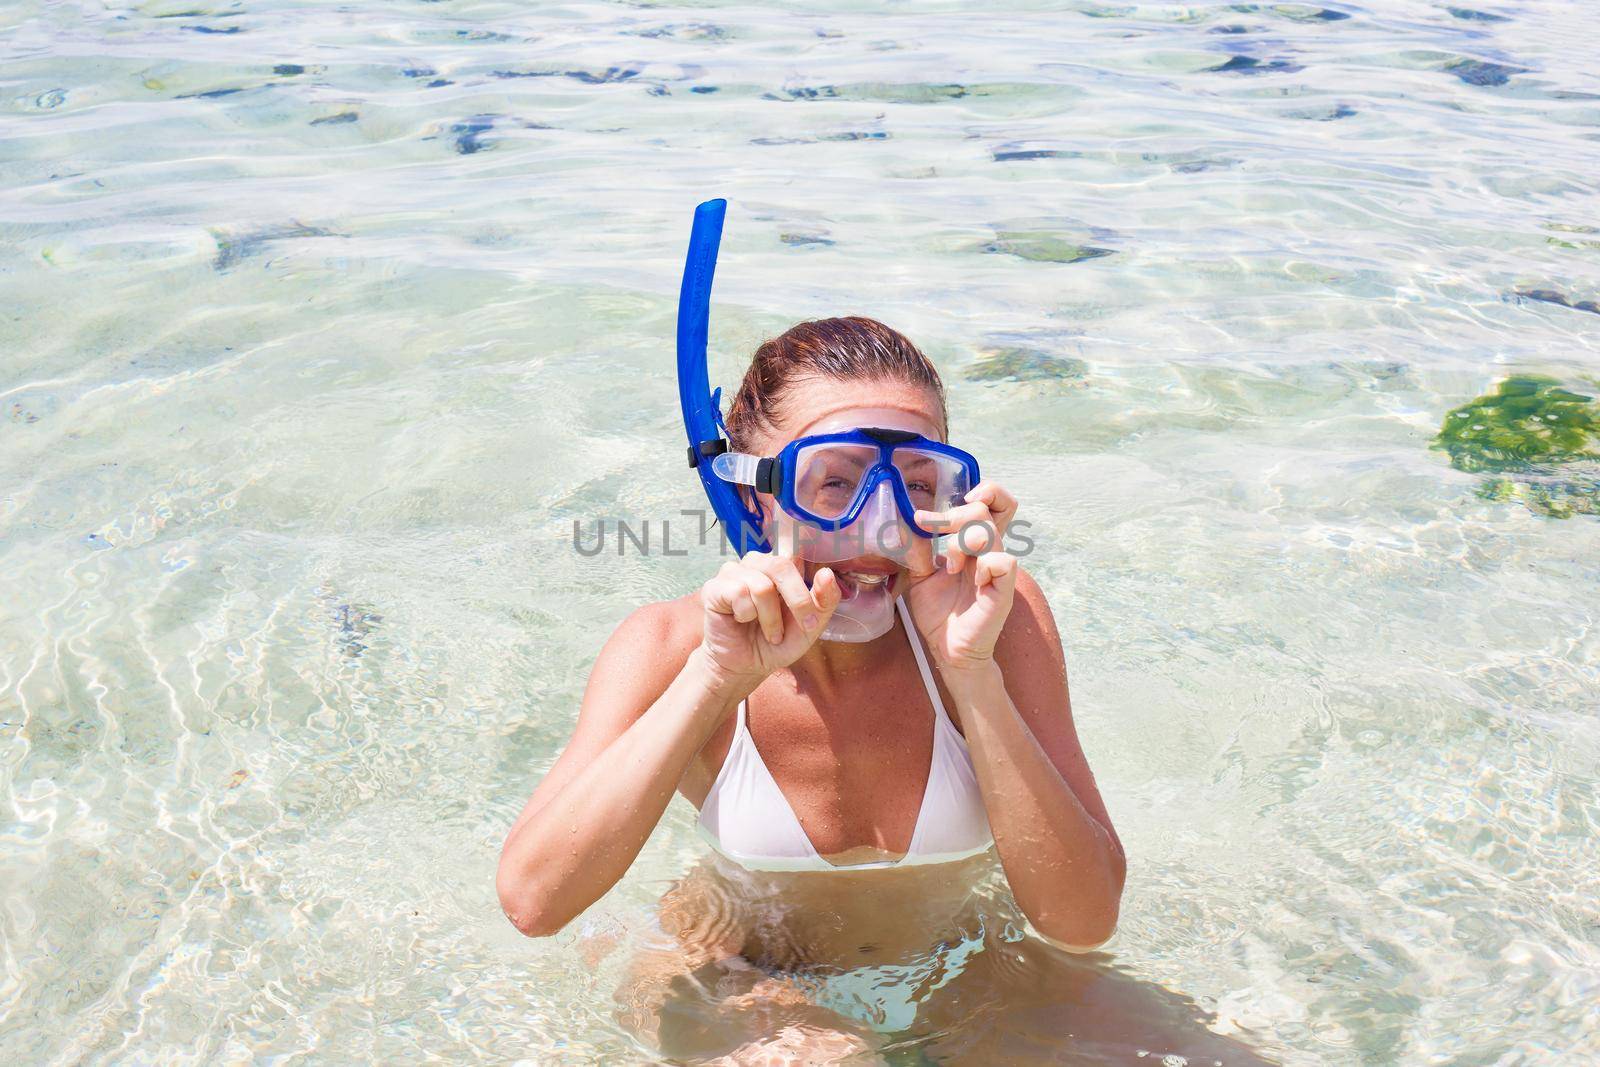 Happy woman on the beach with a diving mask. Bali, Indonesia. Stock image.